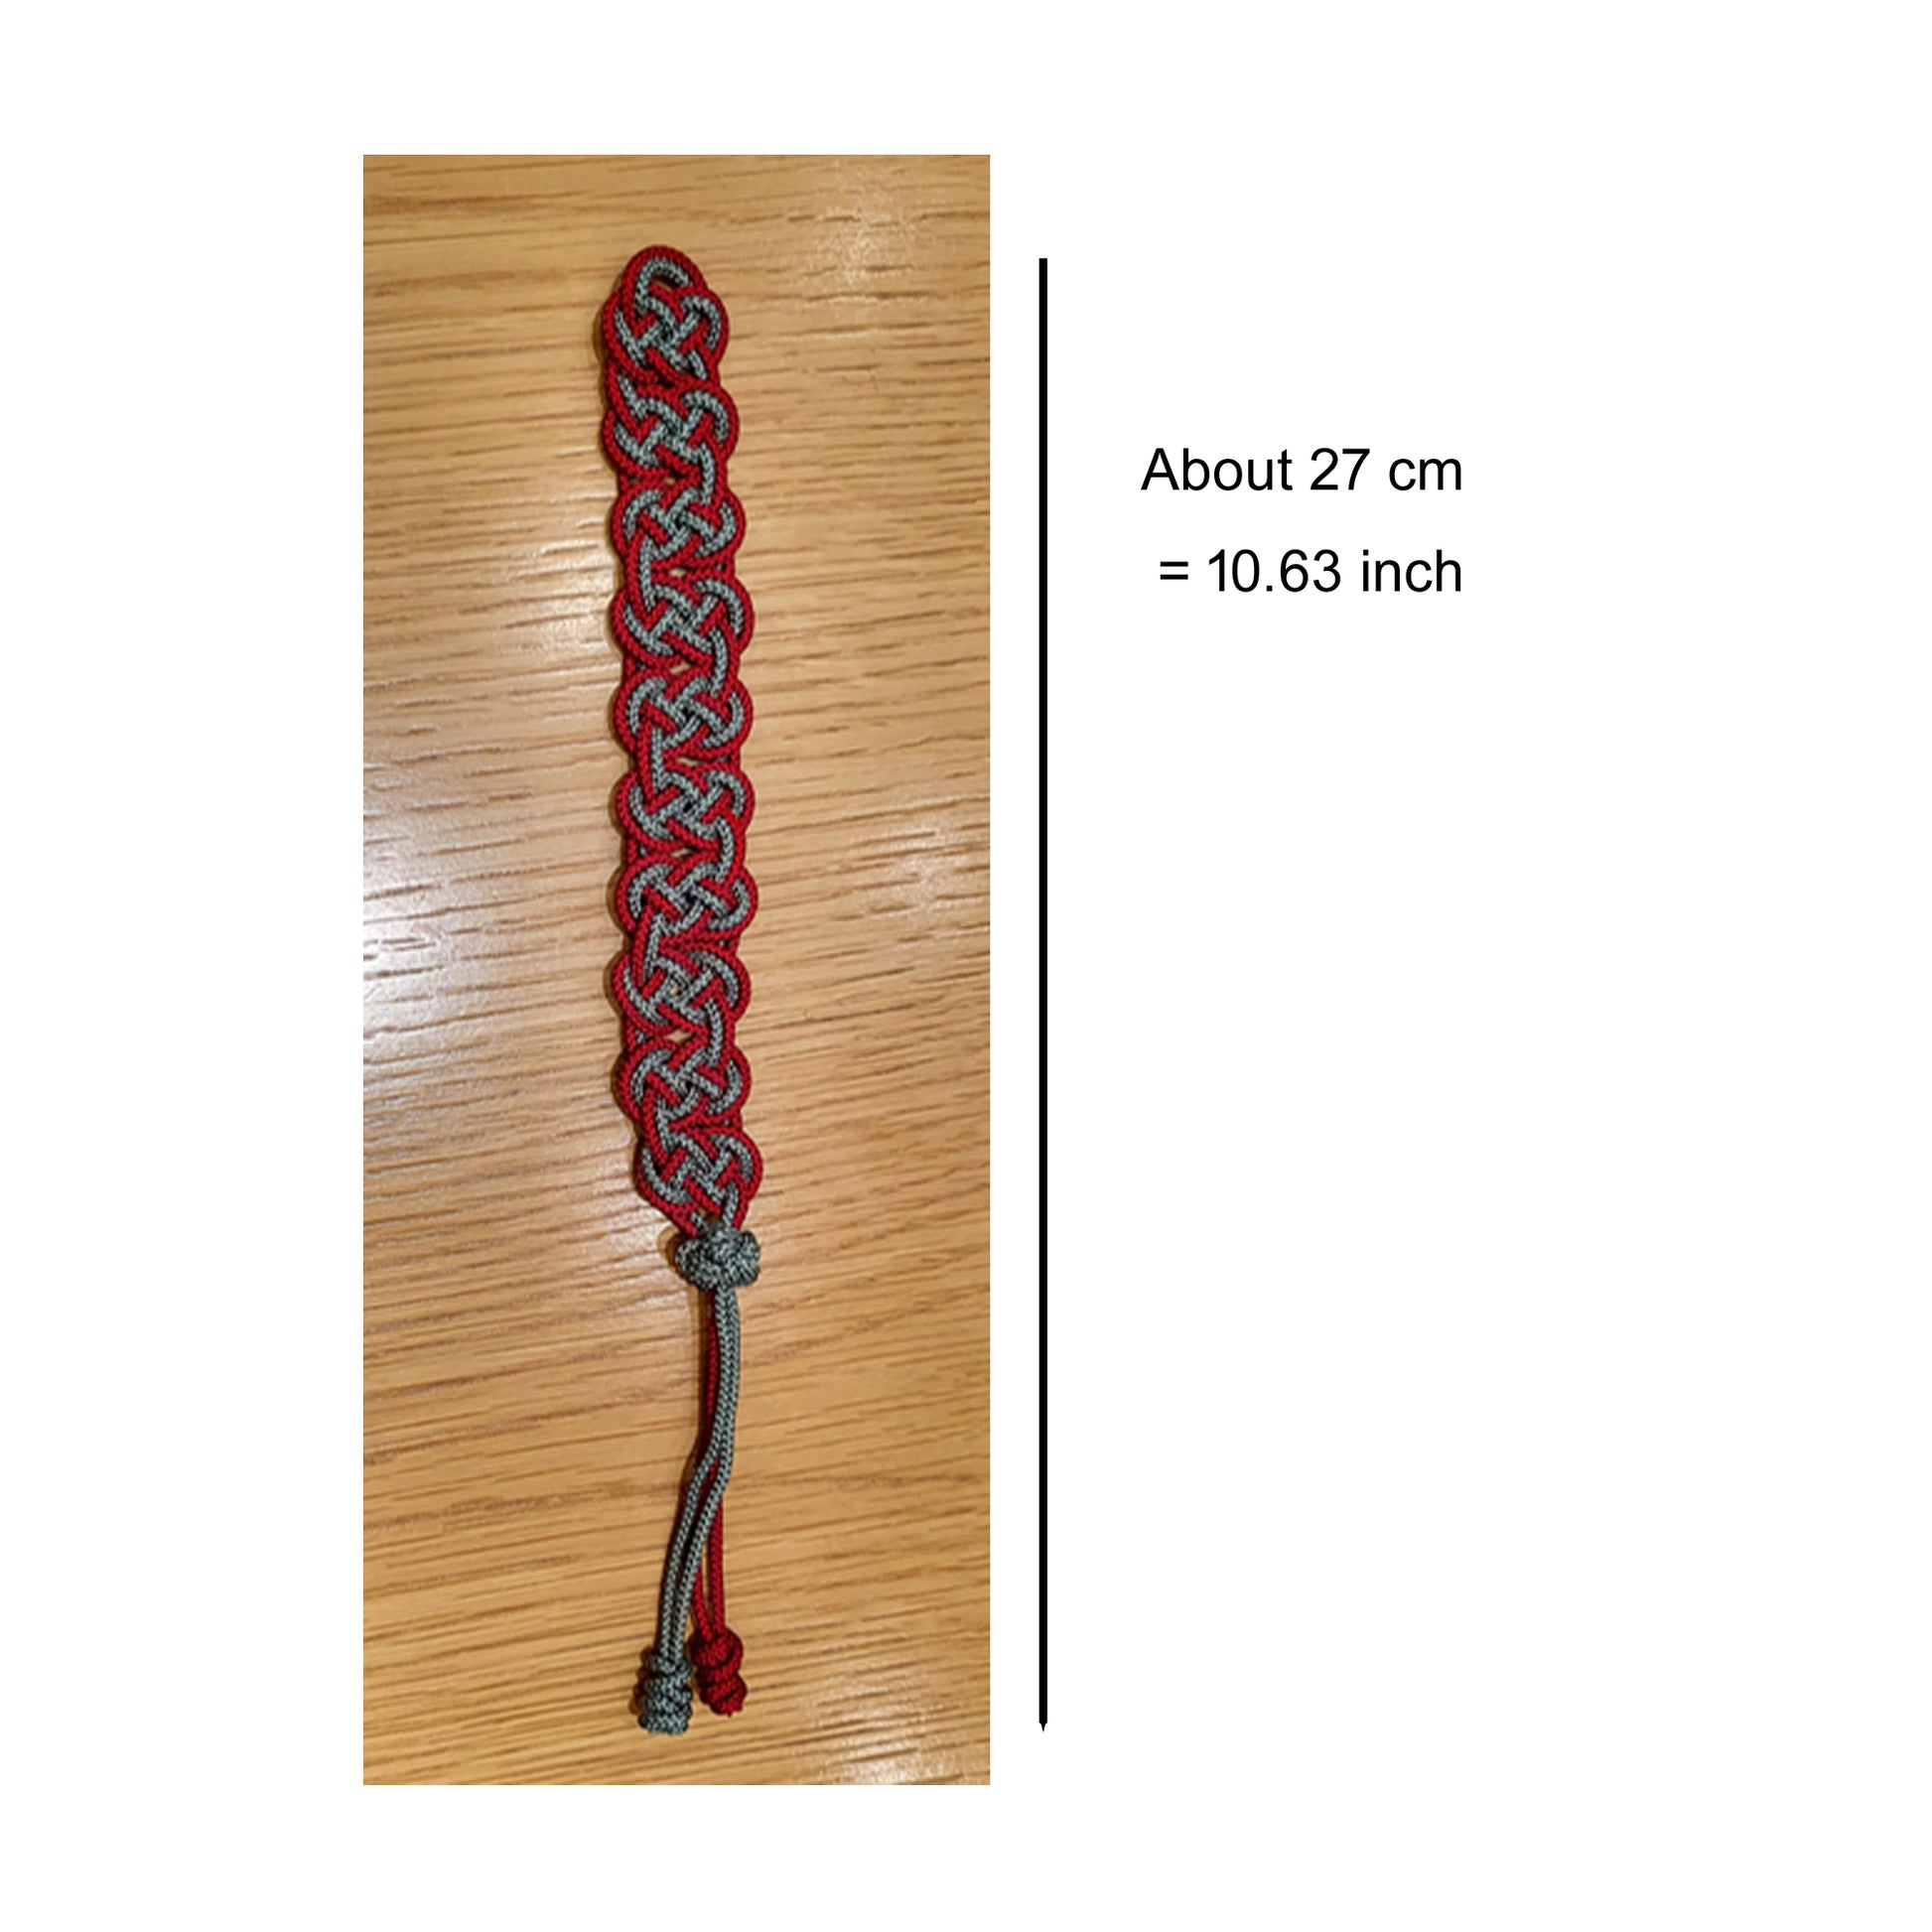 bookmark or key chain, key ring, charm. total length about 27cm, 10.63inch